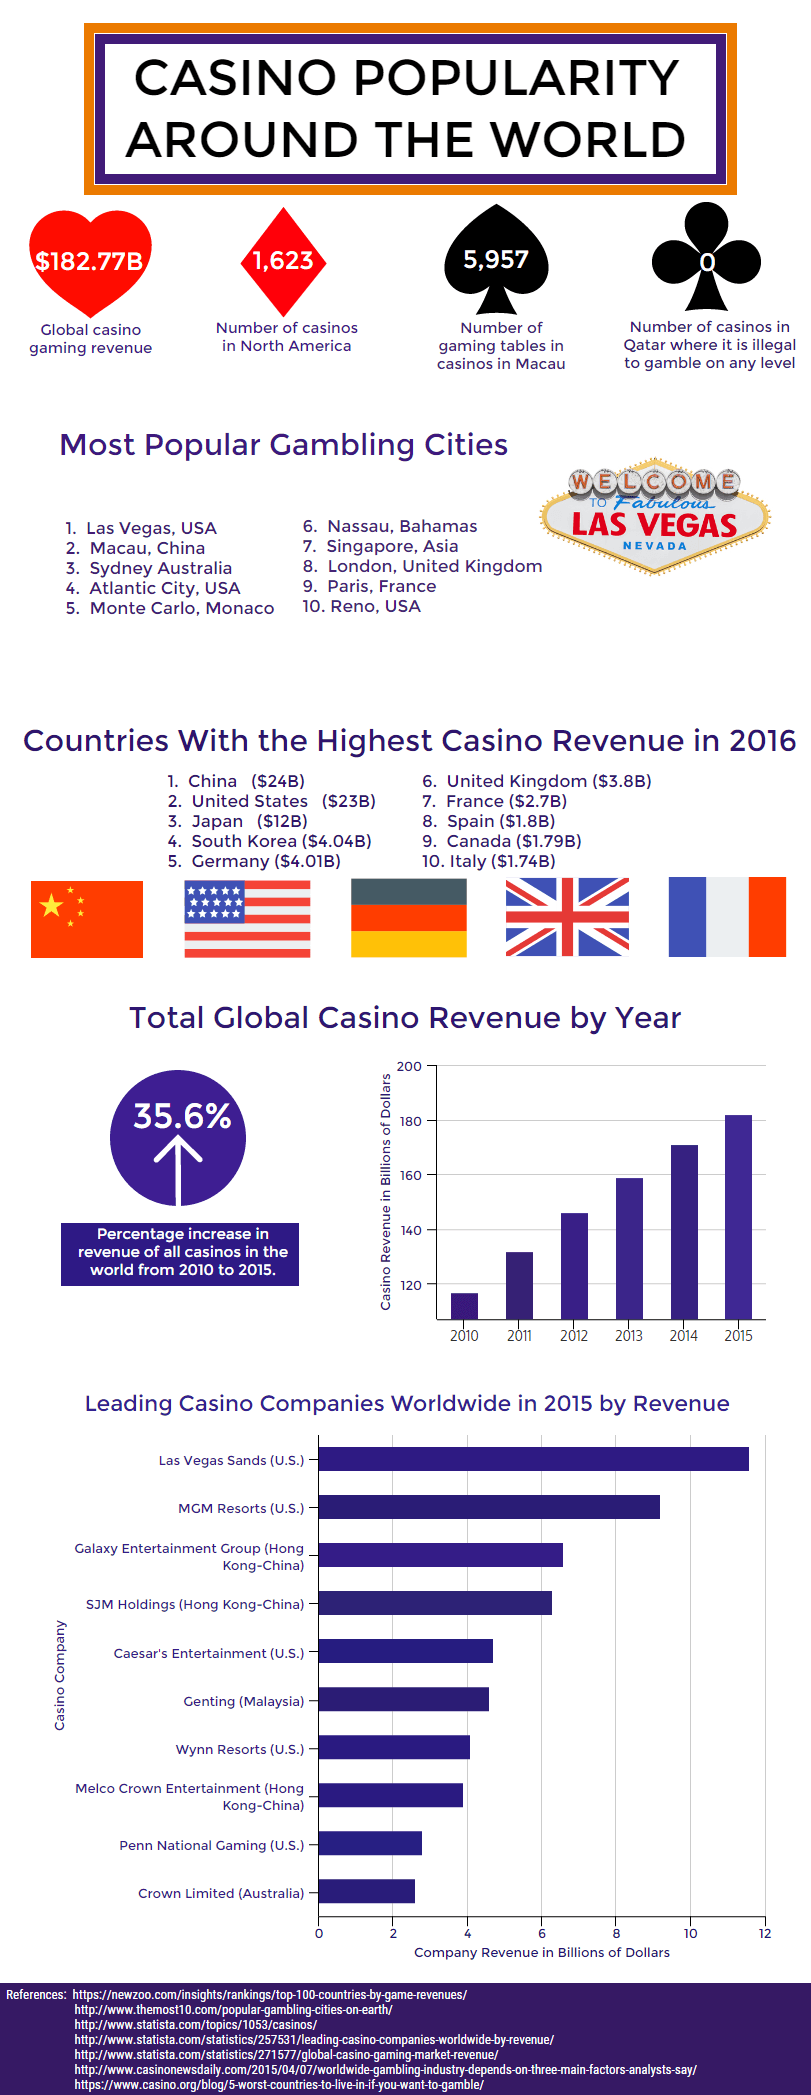 Figures and facts about popularity of casino